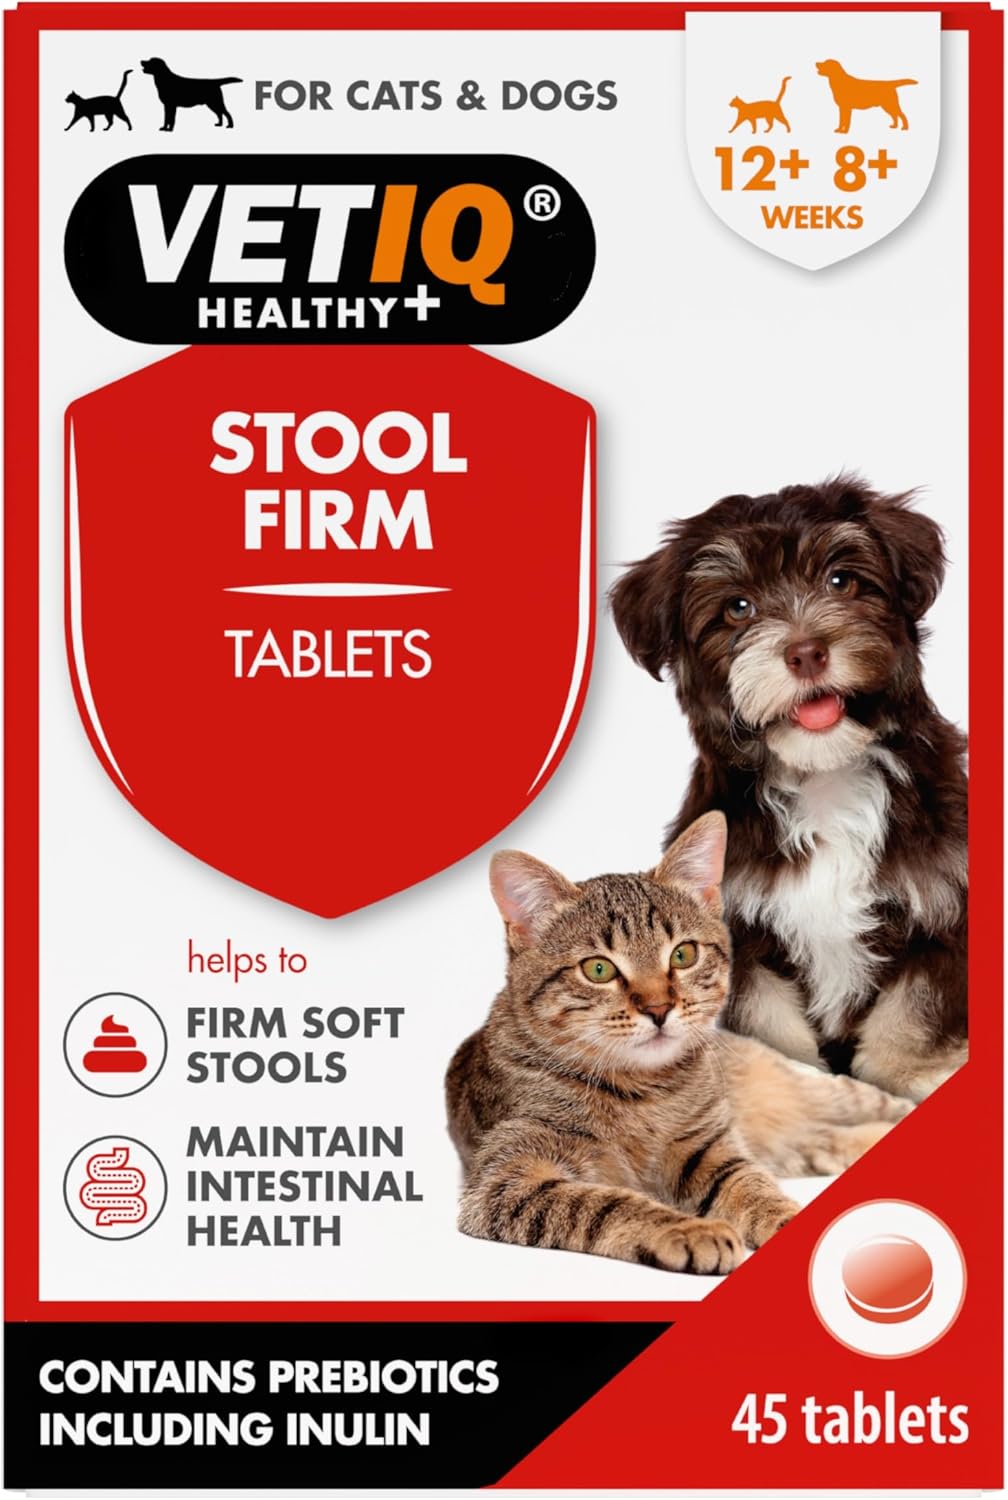 VETIQ Stool Firm Tablets for Dogs & Cats , Contains Pectin & Pumpkin to Help Improve Stool Firmness & Maintain Intestinal Health, 45 Tablets?5436